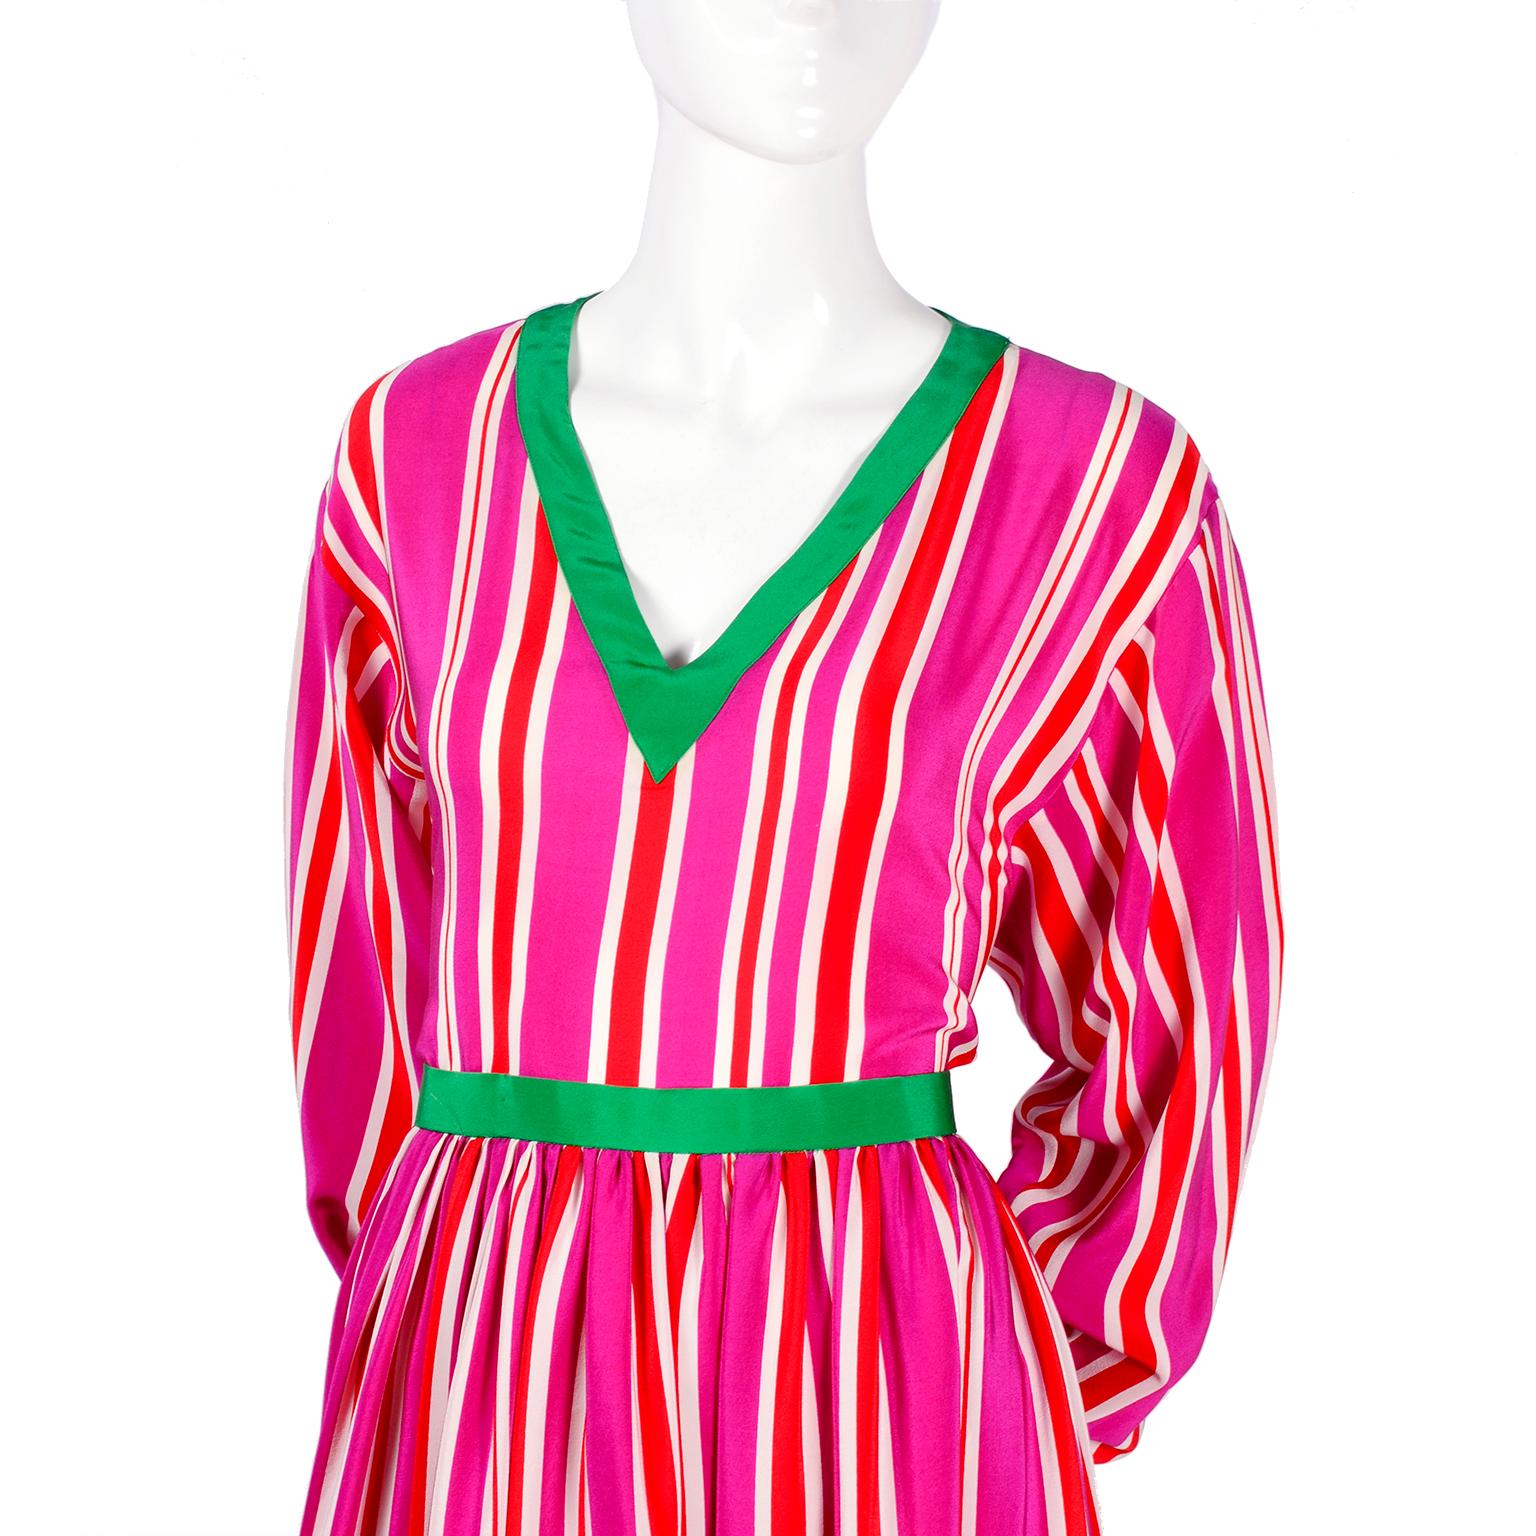 This is such a great vintage 2 piece silk dress from Oscar de la Renta.  The Miss O skirt and top ensemble is in a pink, red and white striped silk with green trim.  You can wear the V neck top with the skirt or as a separate piece.  This outfit was